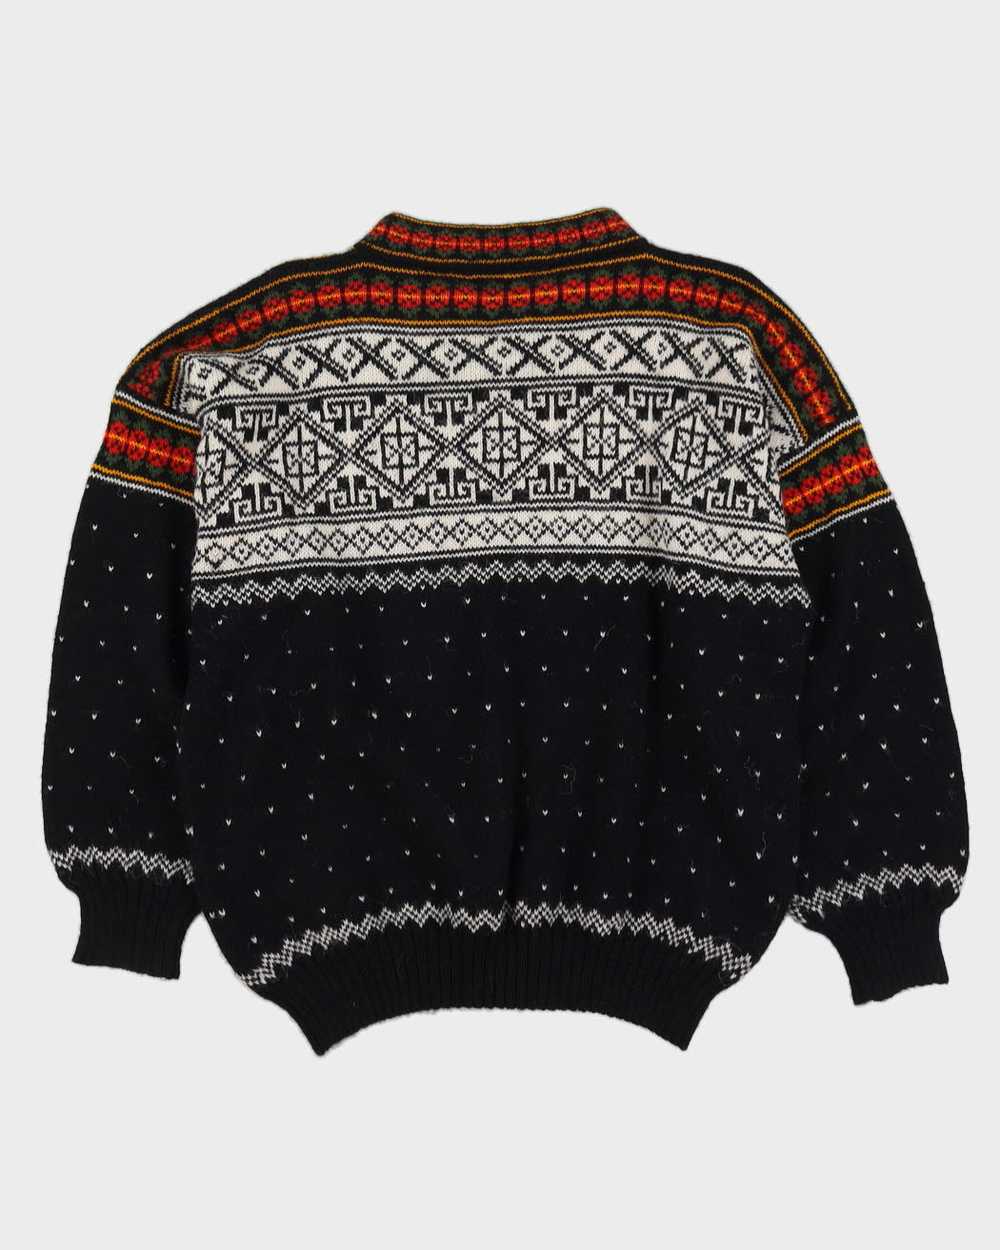 Scandi Style Patterned Hand-Knitted Jumper - L - image 2